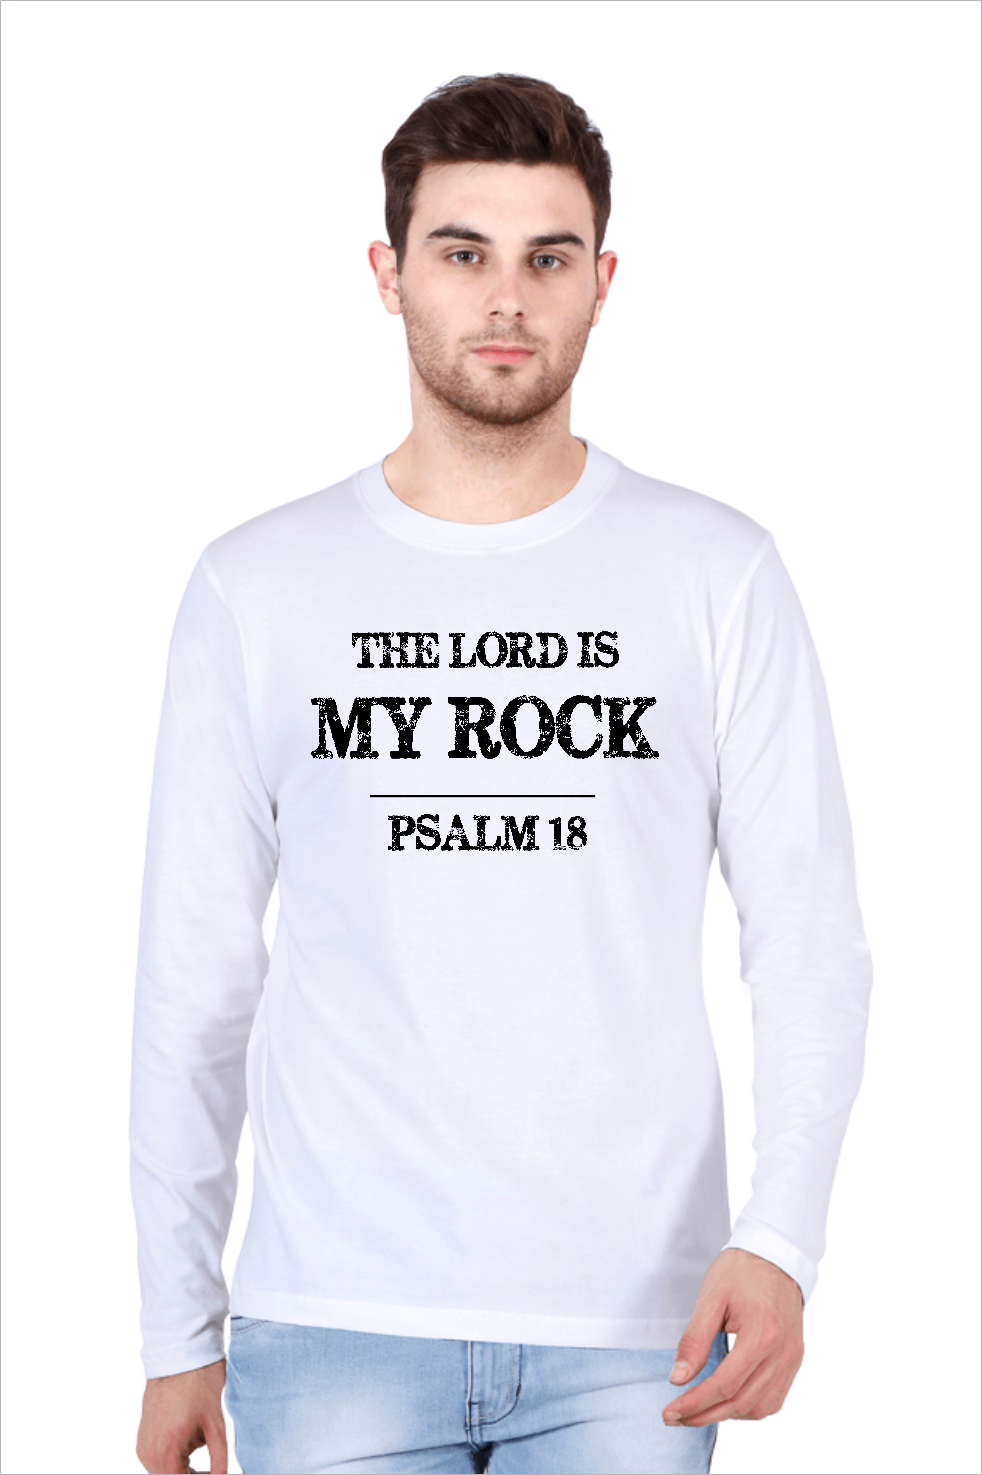 Living Words Men Round Neck T Shirt S / White The Lord is my Rock - Psalm 18